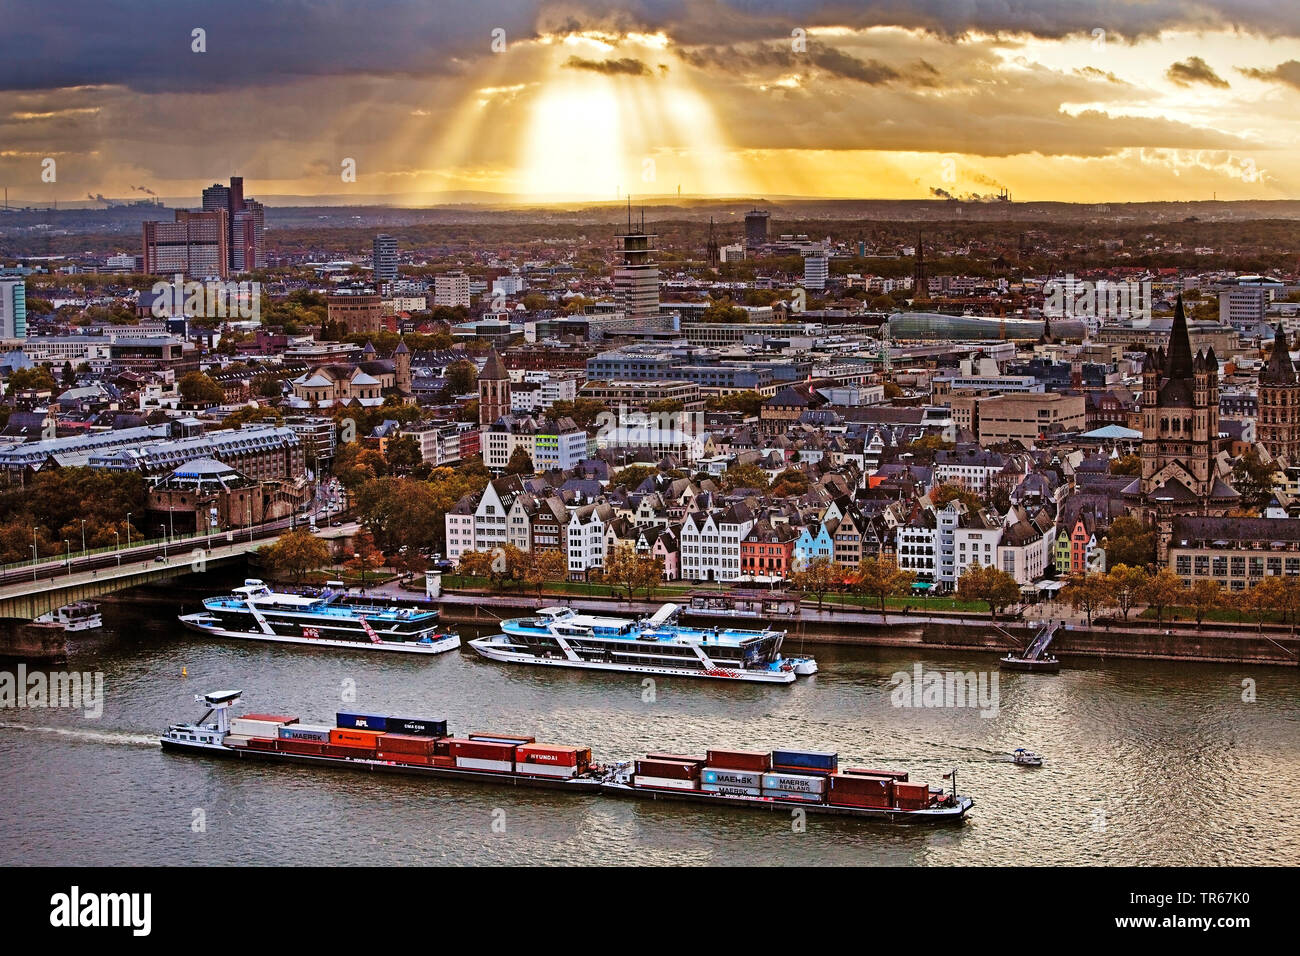 view of the city with ships on river Rhine, Germany, North Rhine-Westphalia, Rhineland, Cologne Stock Photo